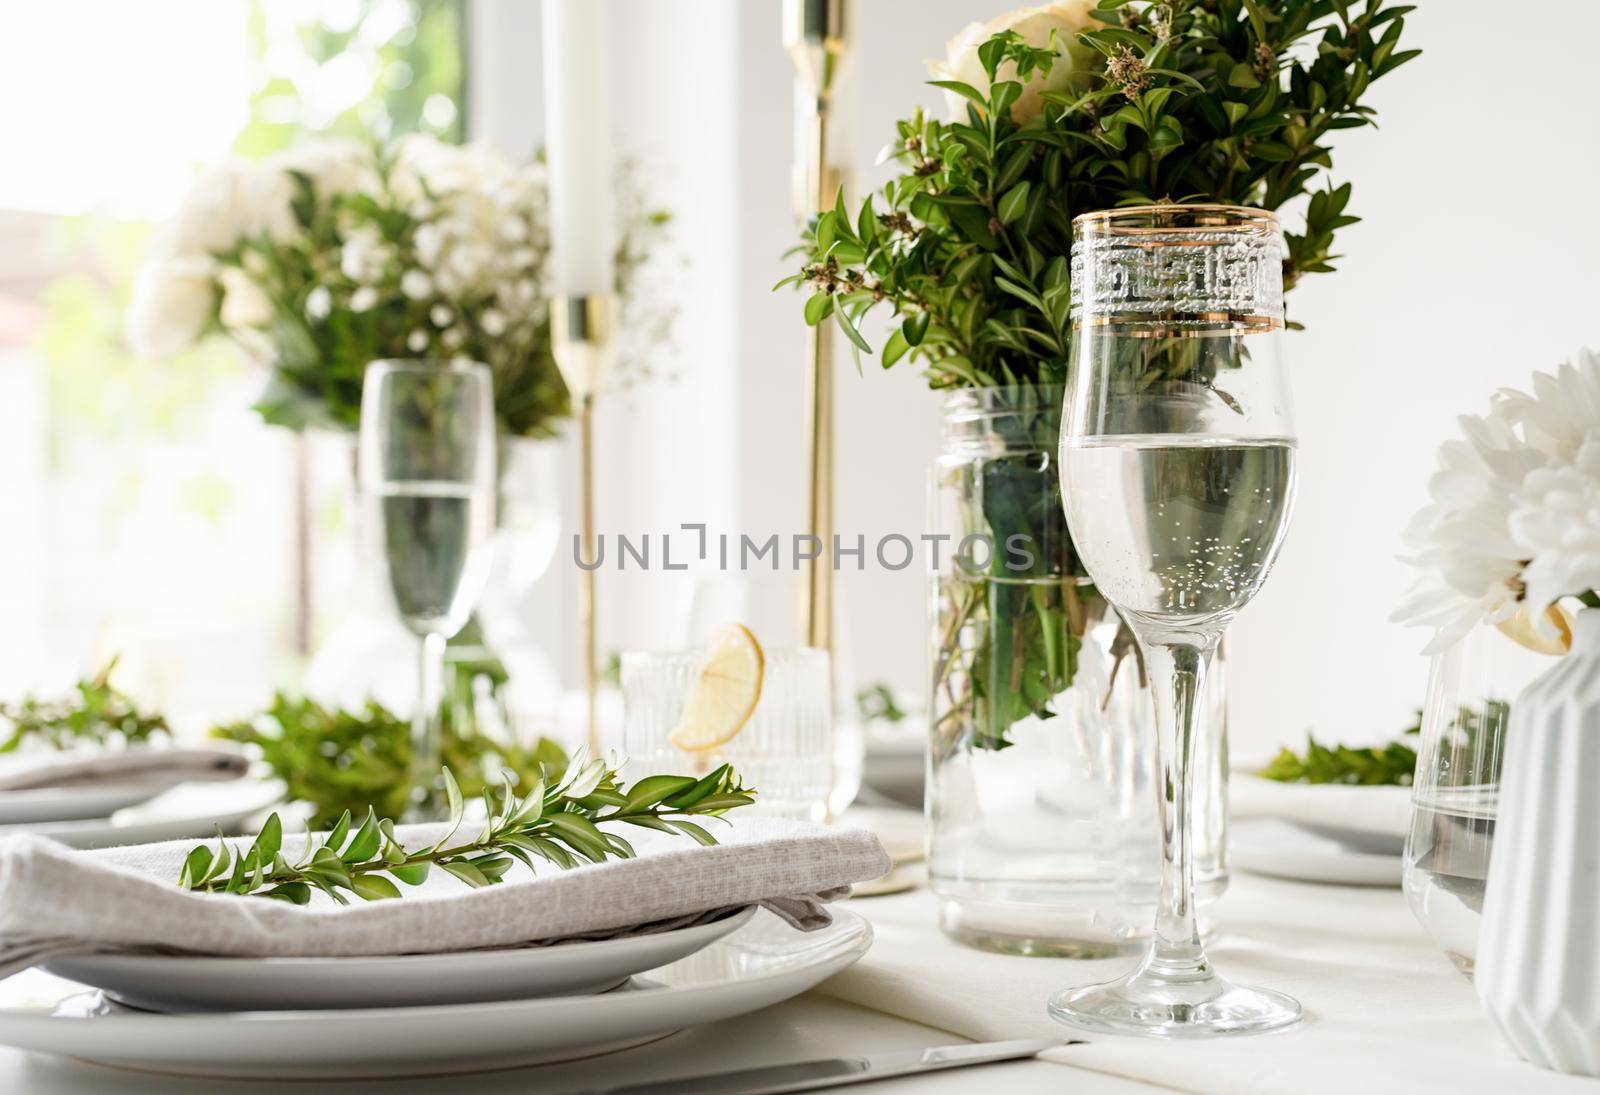 Wedding table set up in taditional style with roses and greenery. Wedding table scapes, front view table setting